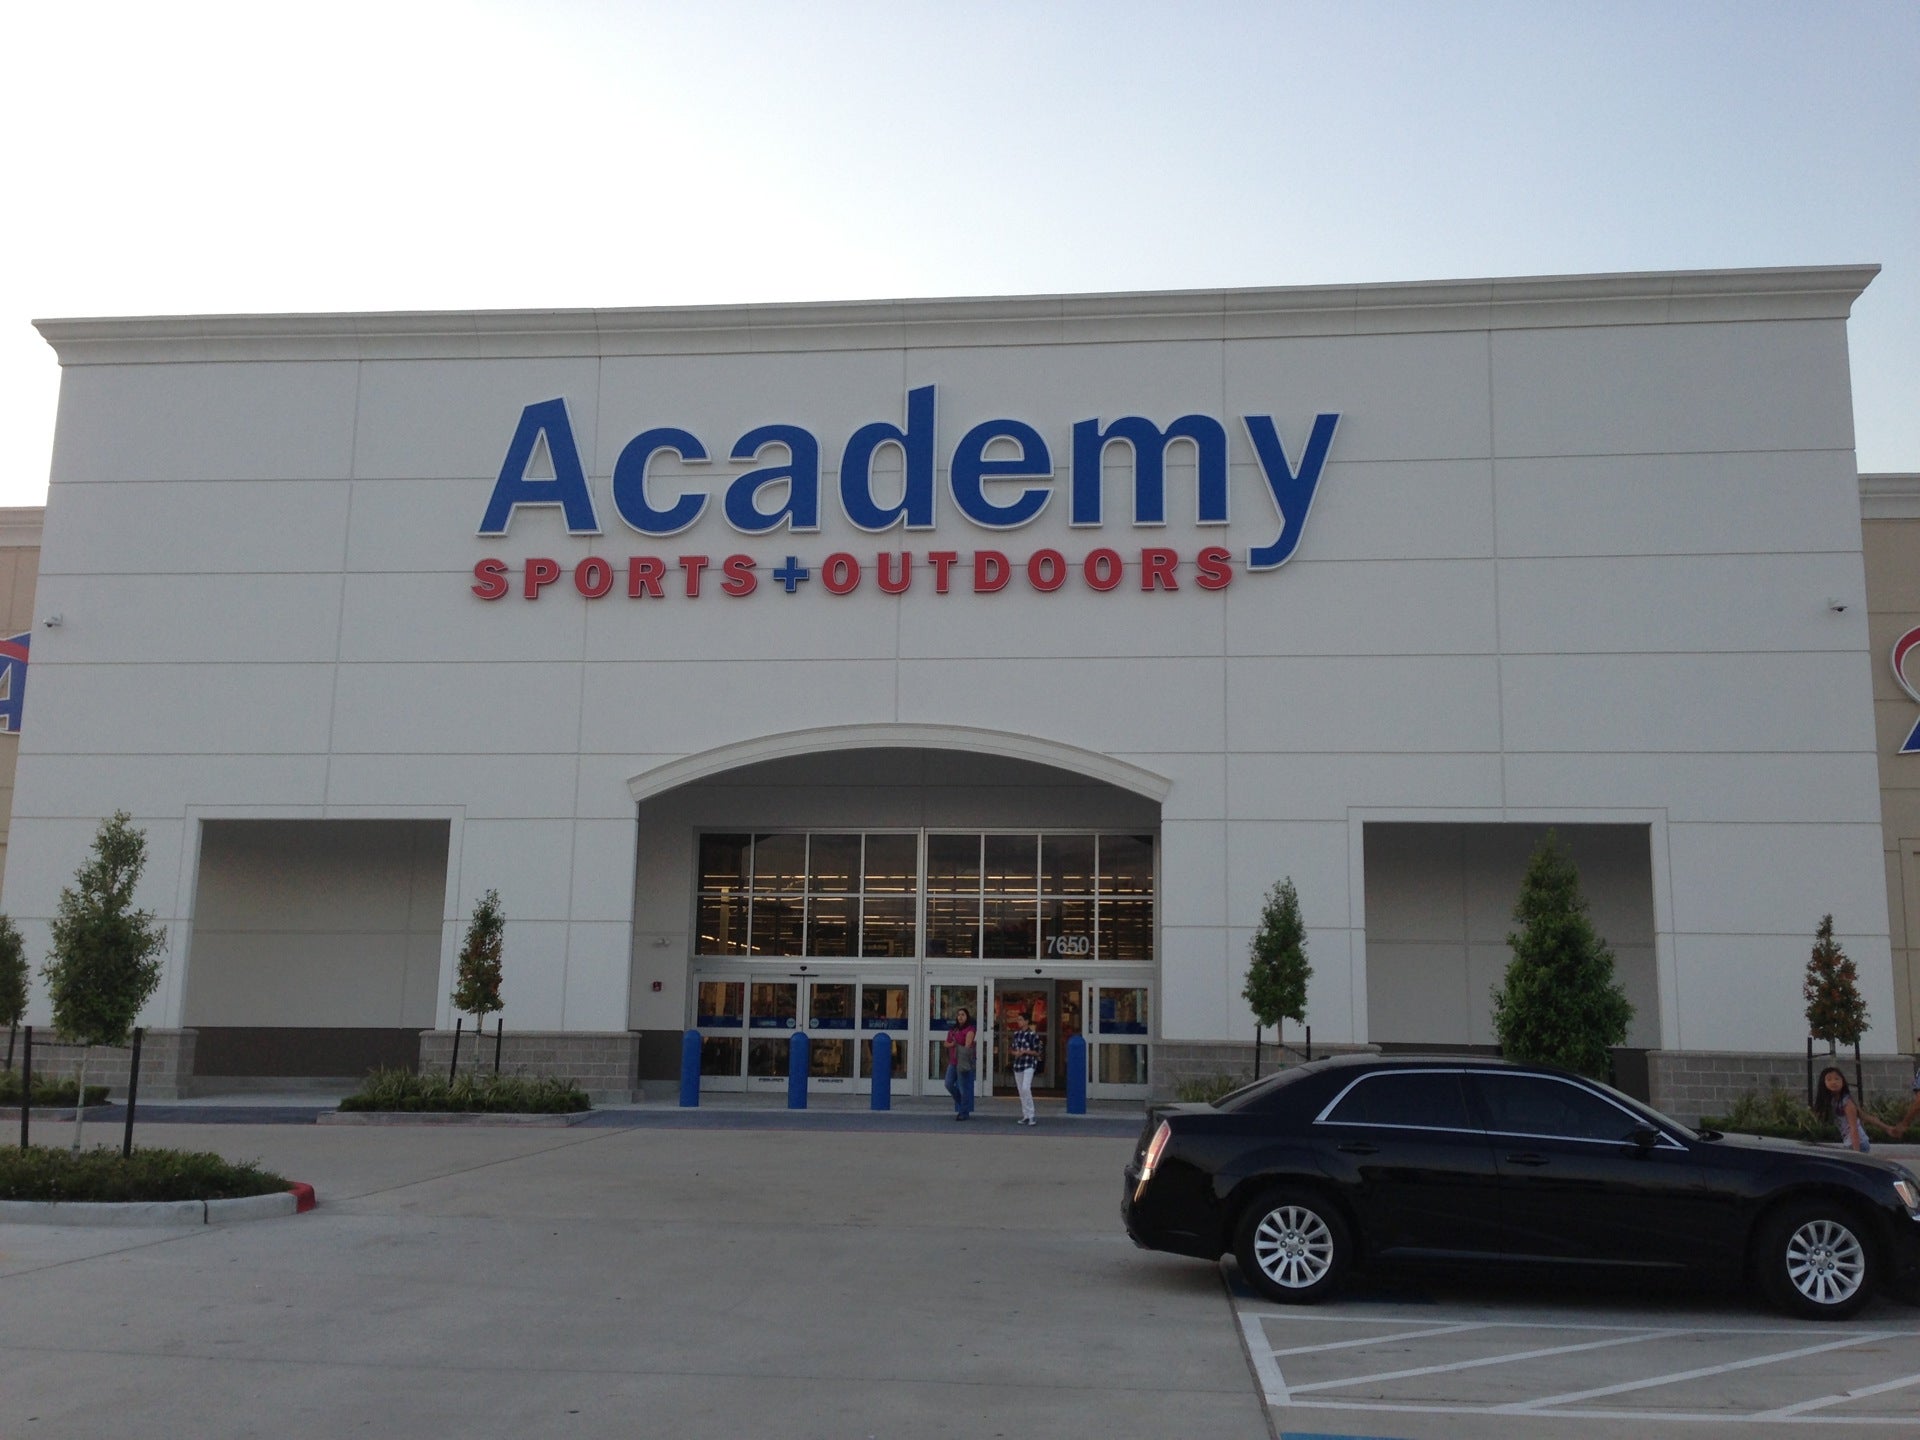 Academy Sports + Outdoors, 7650 Farm-to-Market 1960 Rd W, Houston, TX,  Factory Outlets - MapQuest